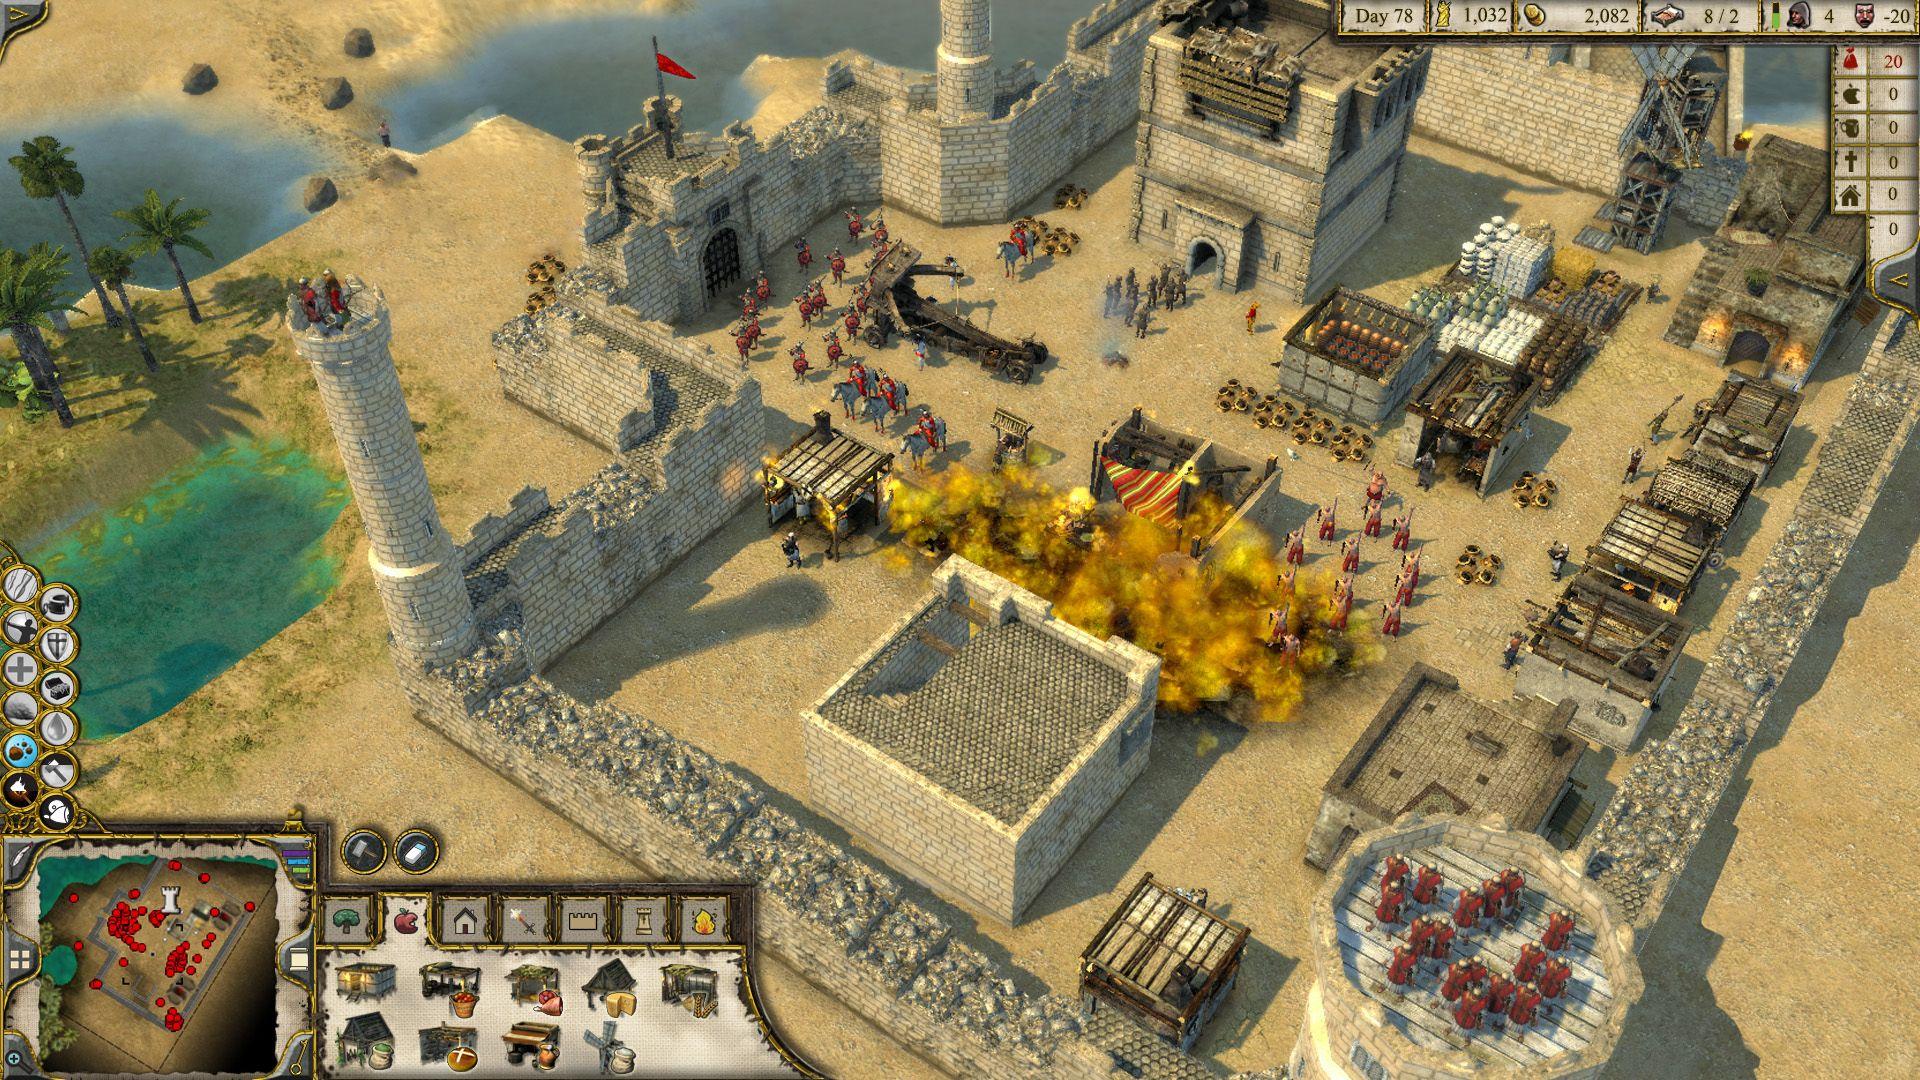 Welcome to our Stronghold Crusader 2 cheats page. Here you'll find